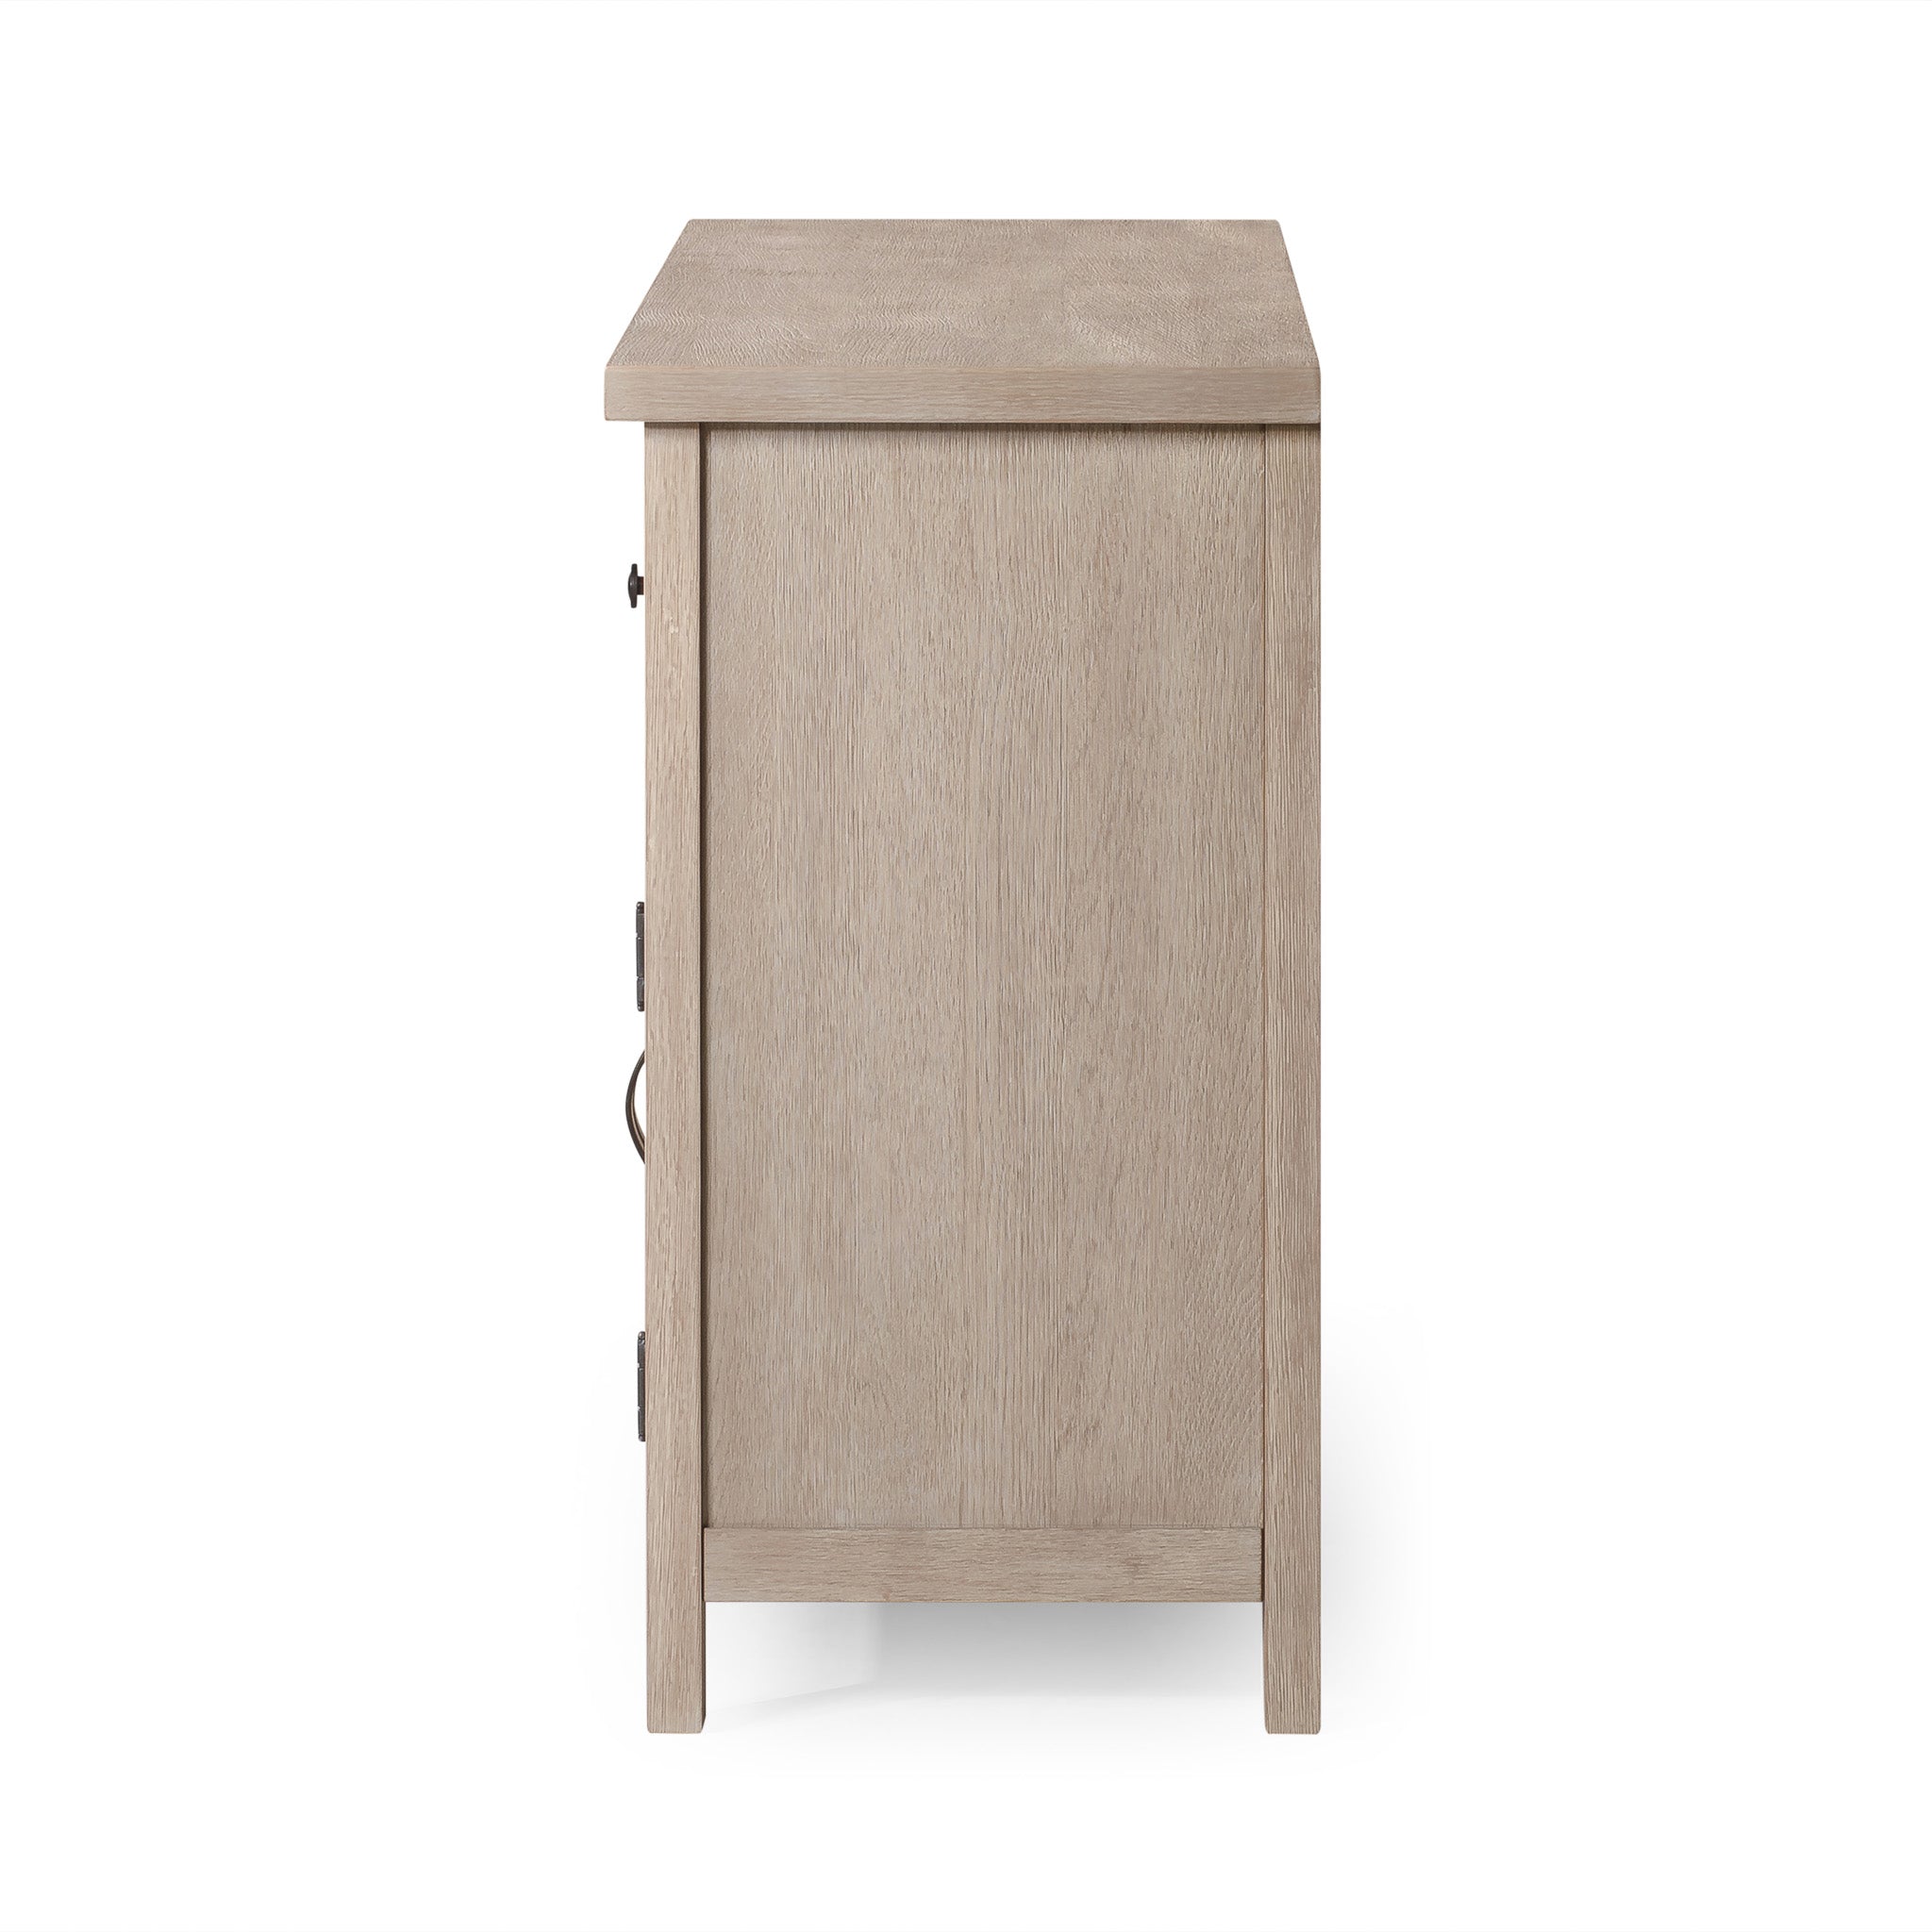 Felix Organic Wooden Sideboard in Weathered White Finish in Cabinets by Maven Lane